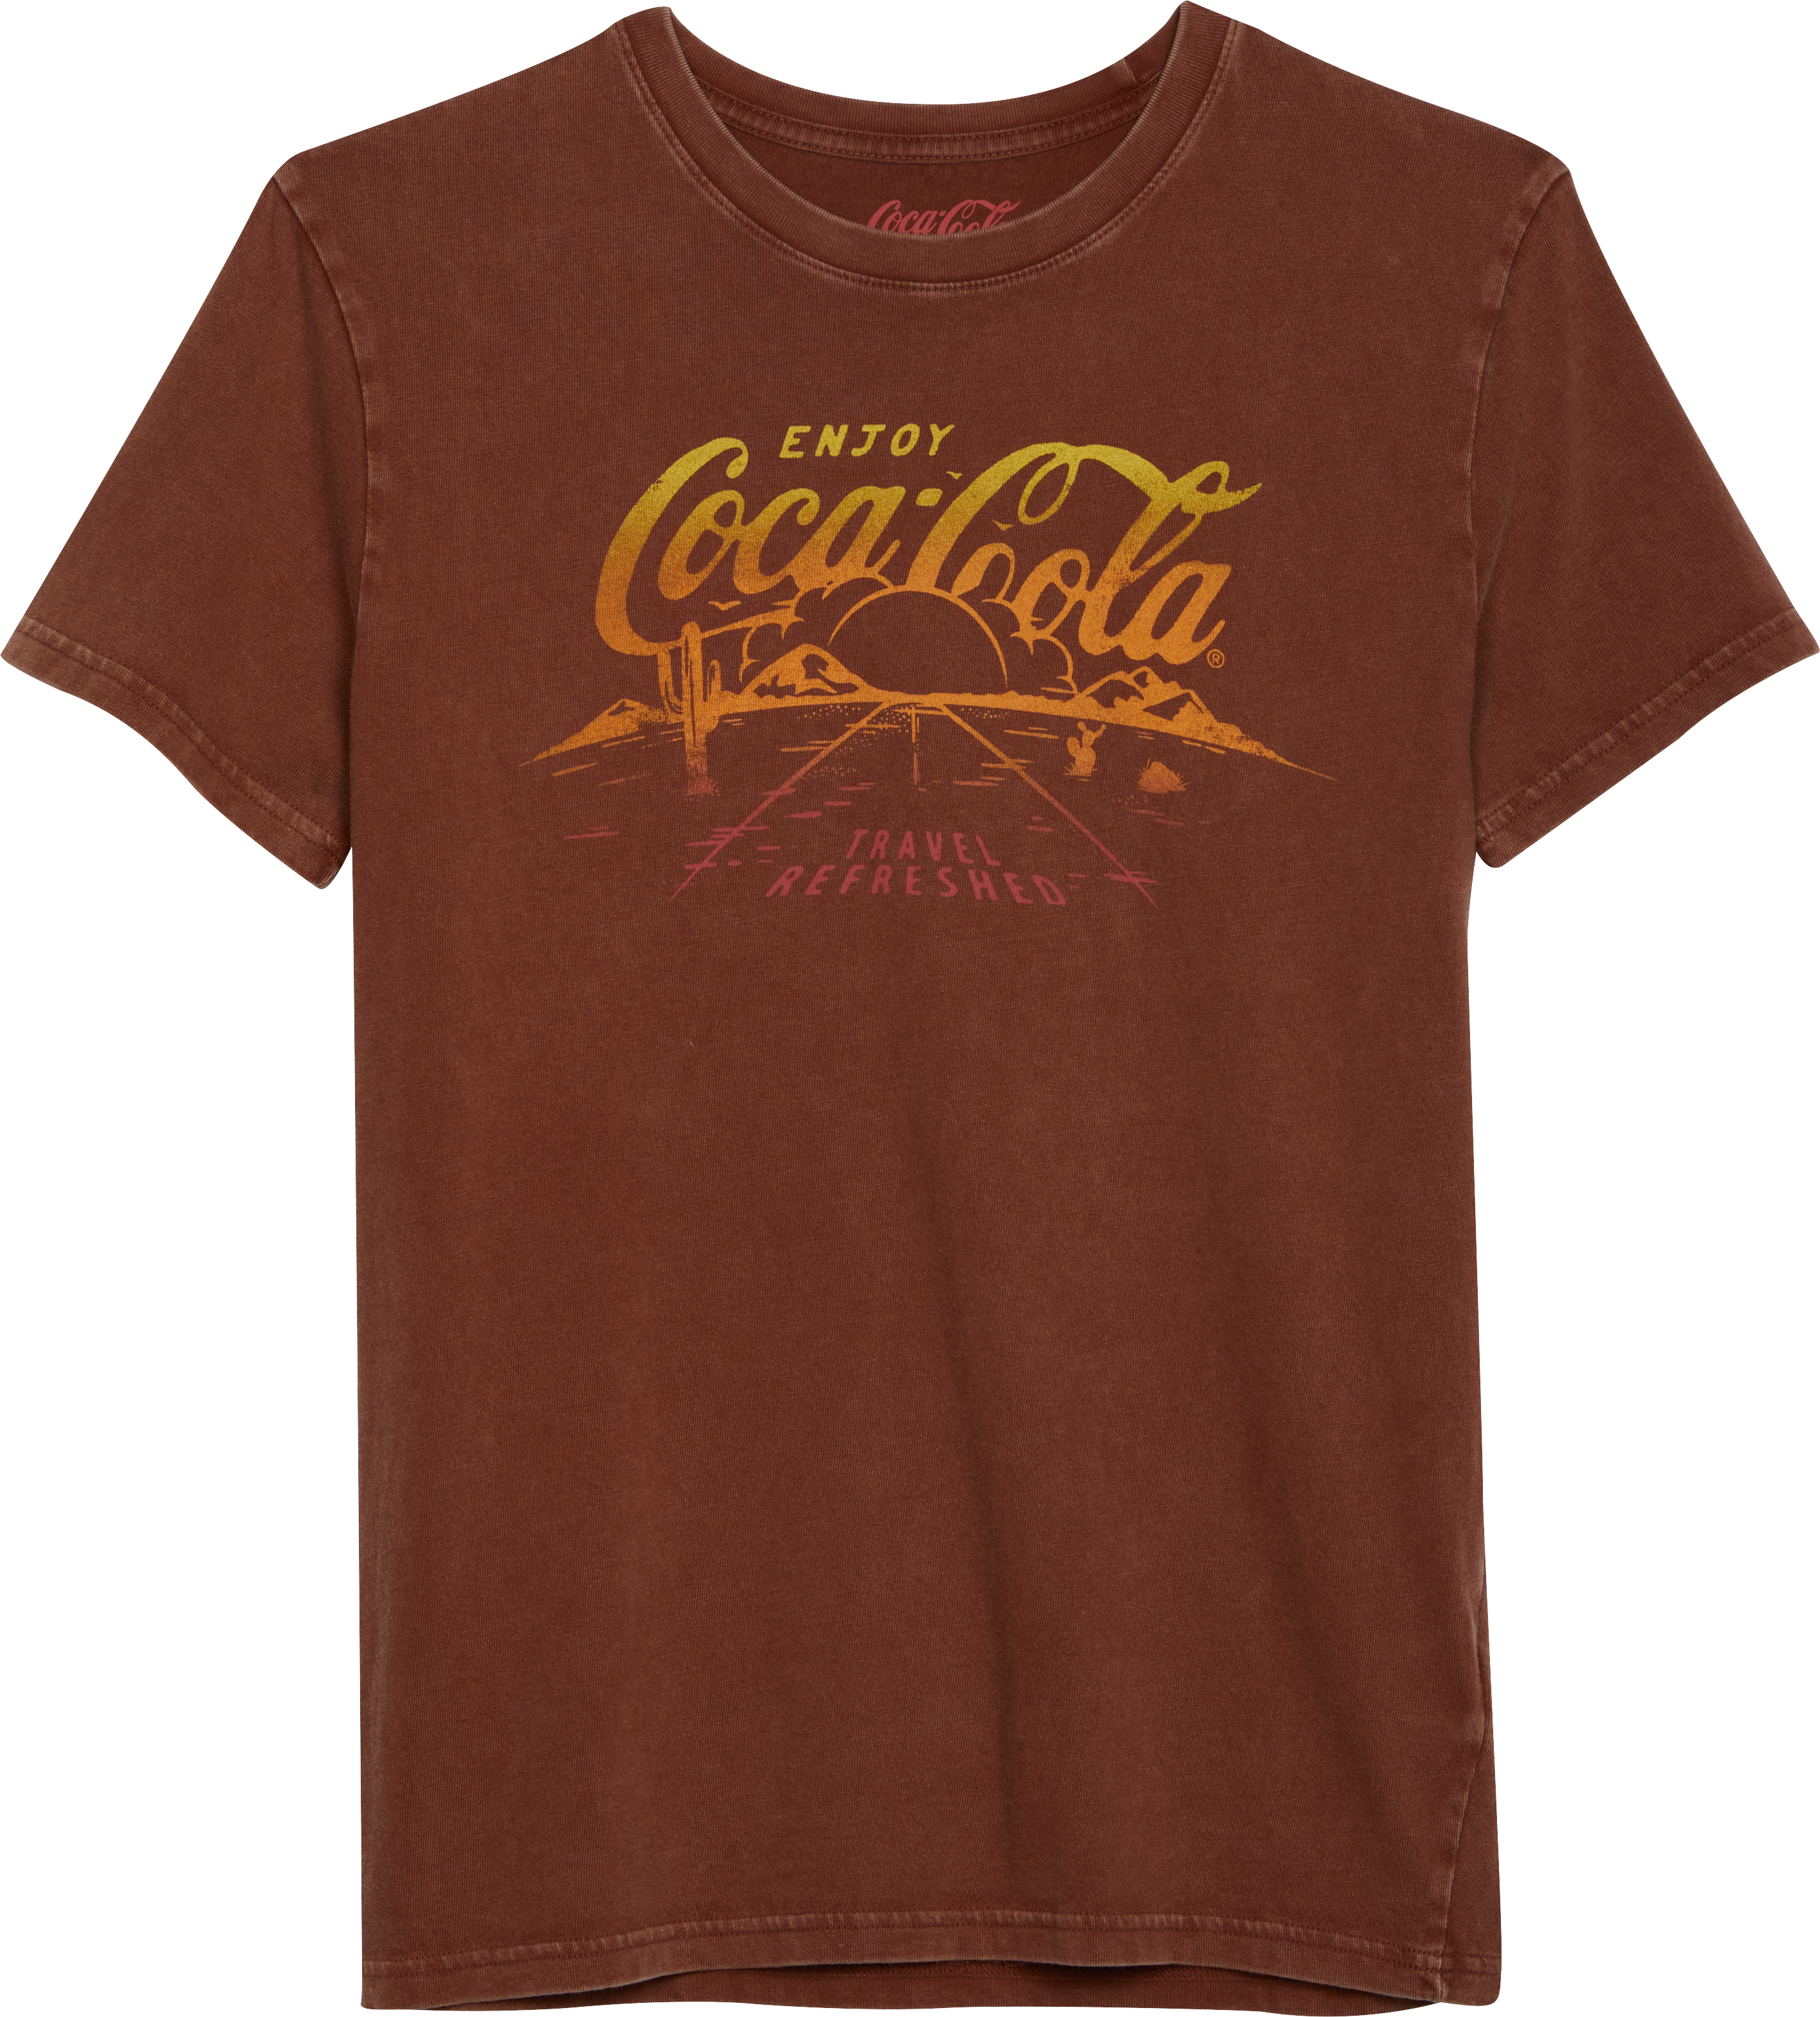 Lucky Brand Classic Fit Coca-Cola® Road T-Shirt, Cinnamon